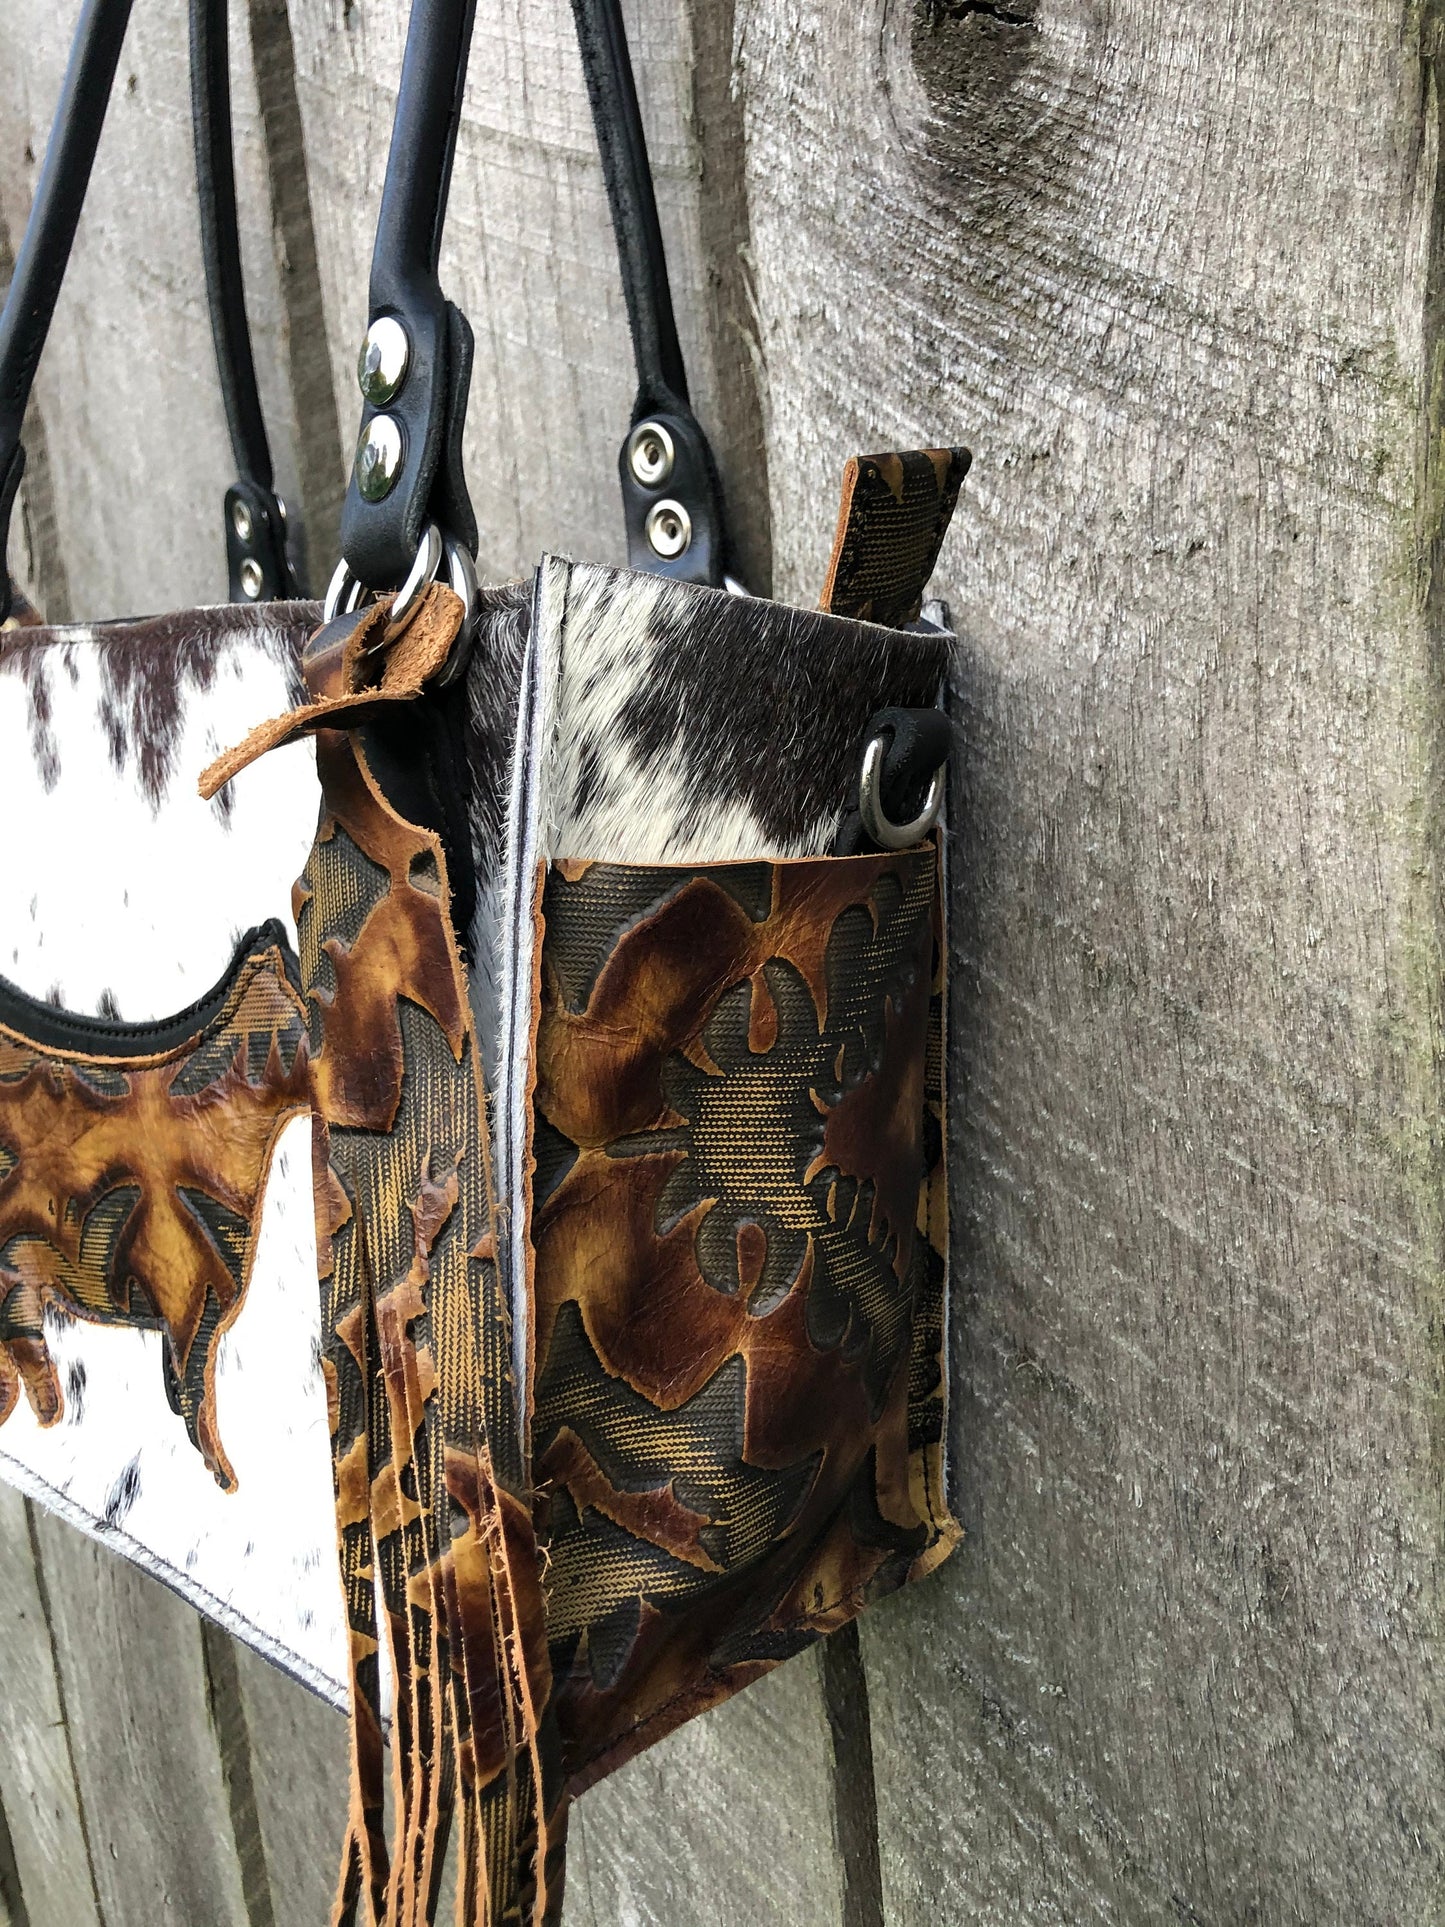 Handmade Mini Tote, Hair On Hide, Cowhide Purse, Cowhide Toto, Leather –  Rising Star Forge and Leather Works